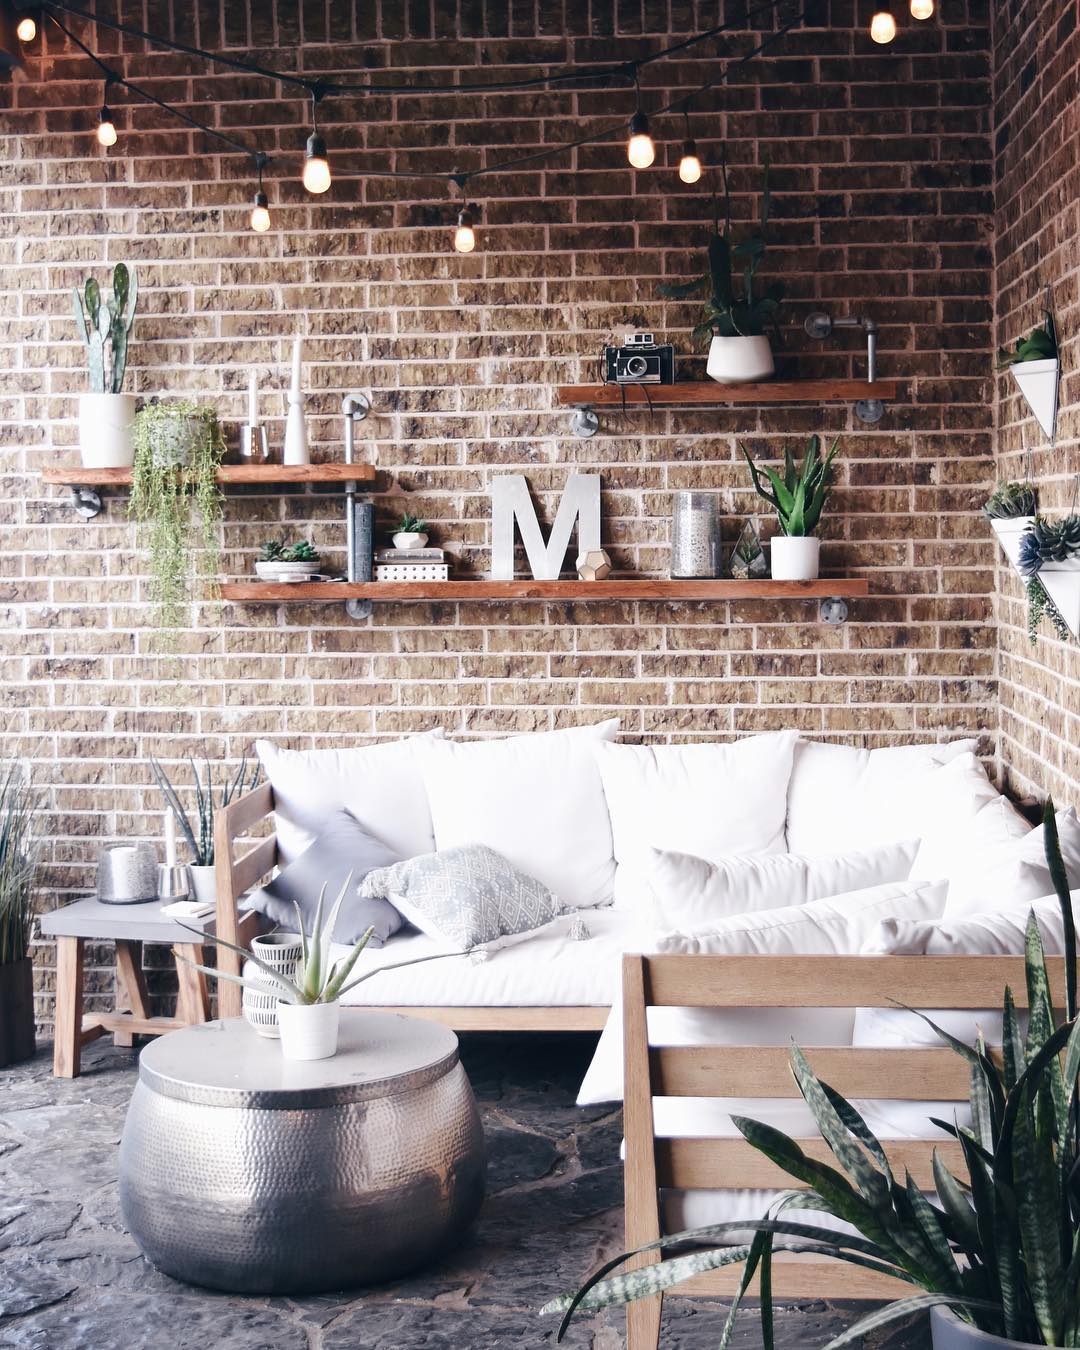 outdoor seating area with floating shelves set up on brick wall photo by Instagram user @pillowthoughthome